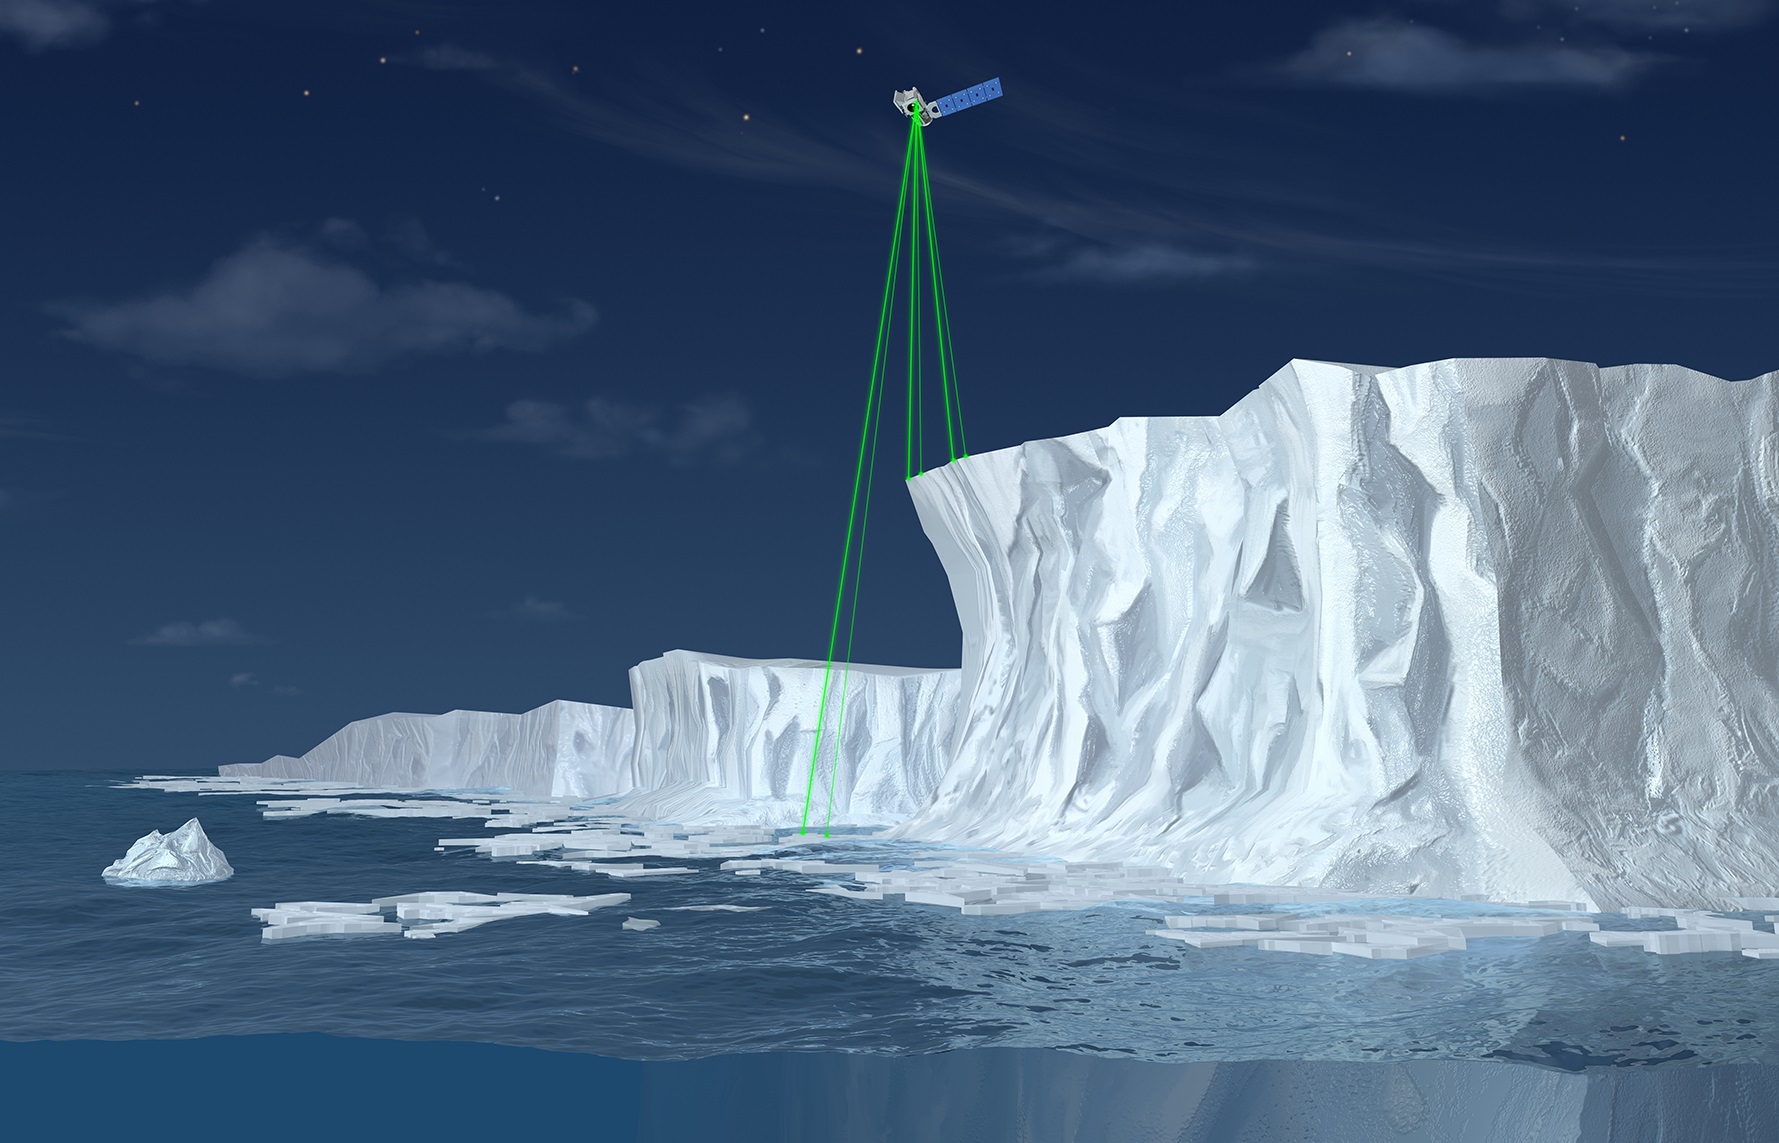 NASA’s Ice, Cloud and land Elevation Satellite-2 flying above an ice shelf and overlooking the ice and ocean surface below. Green lines illustrate the satellite observing Earth’s ice.